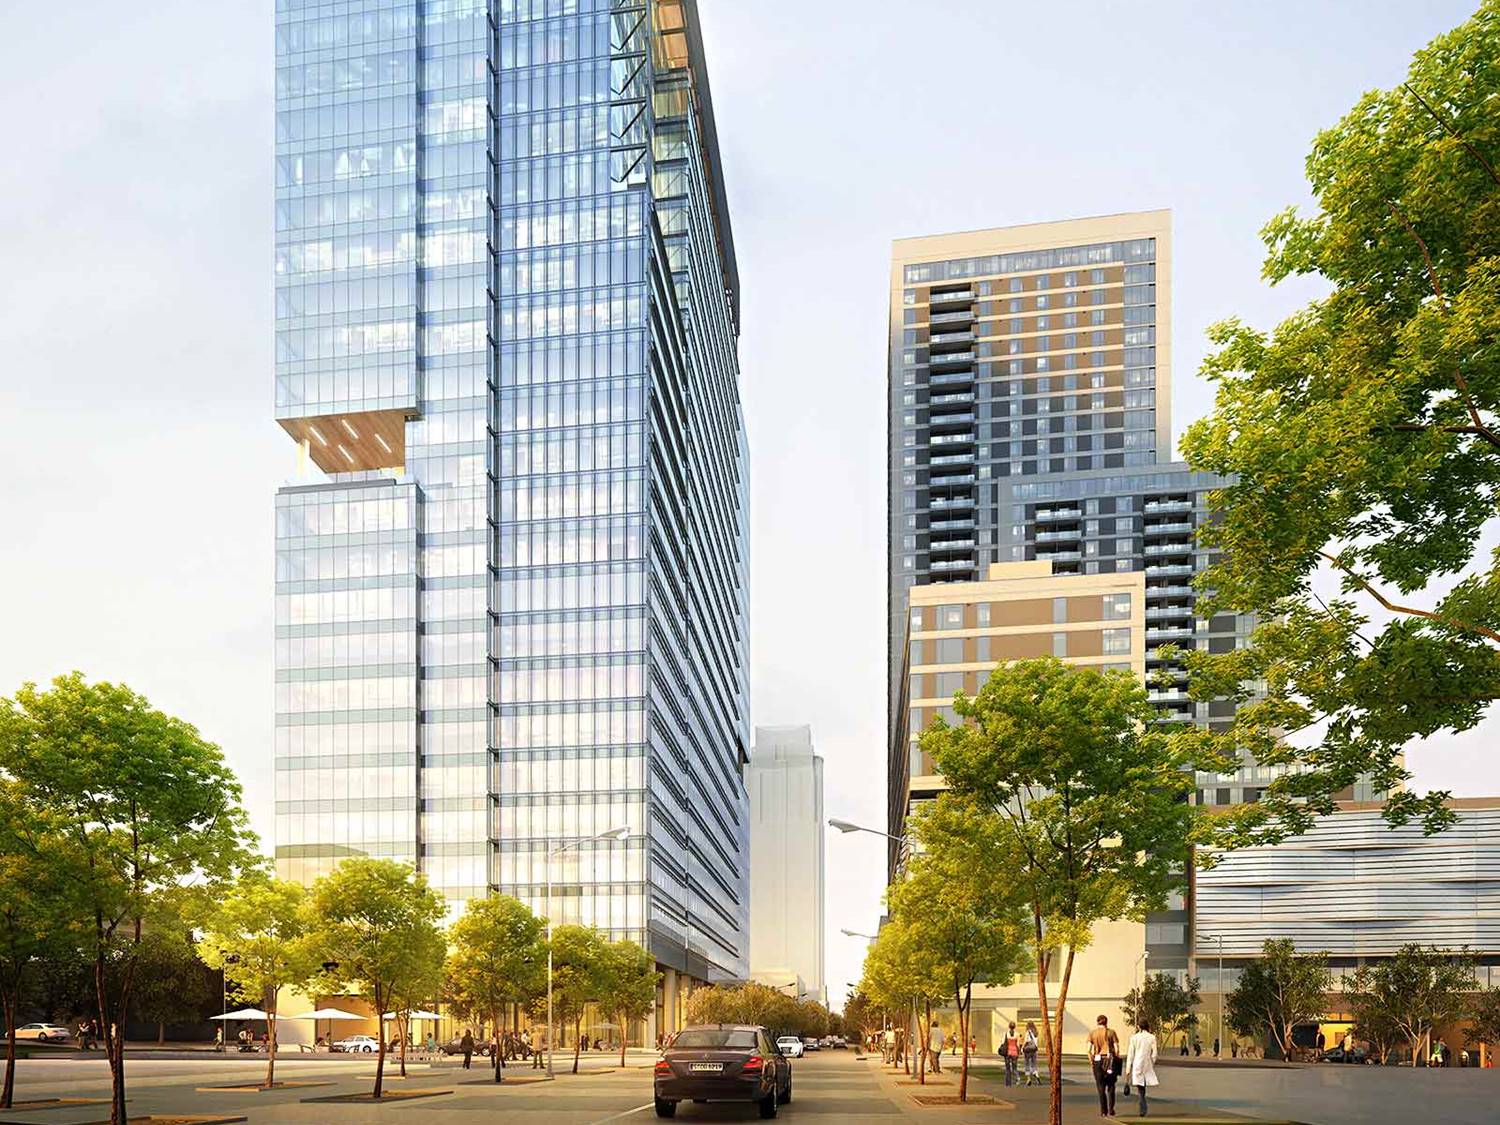 Image Credit: Green Water : Block 23 Office Tower via Trammell Crow Company